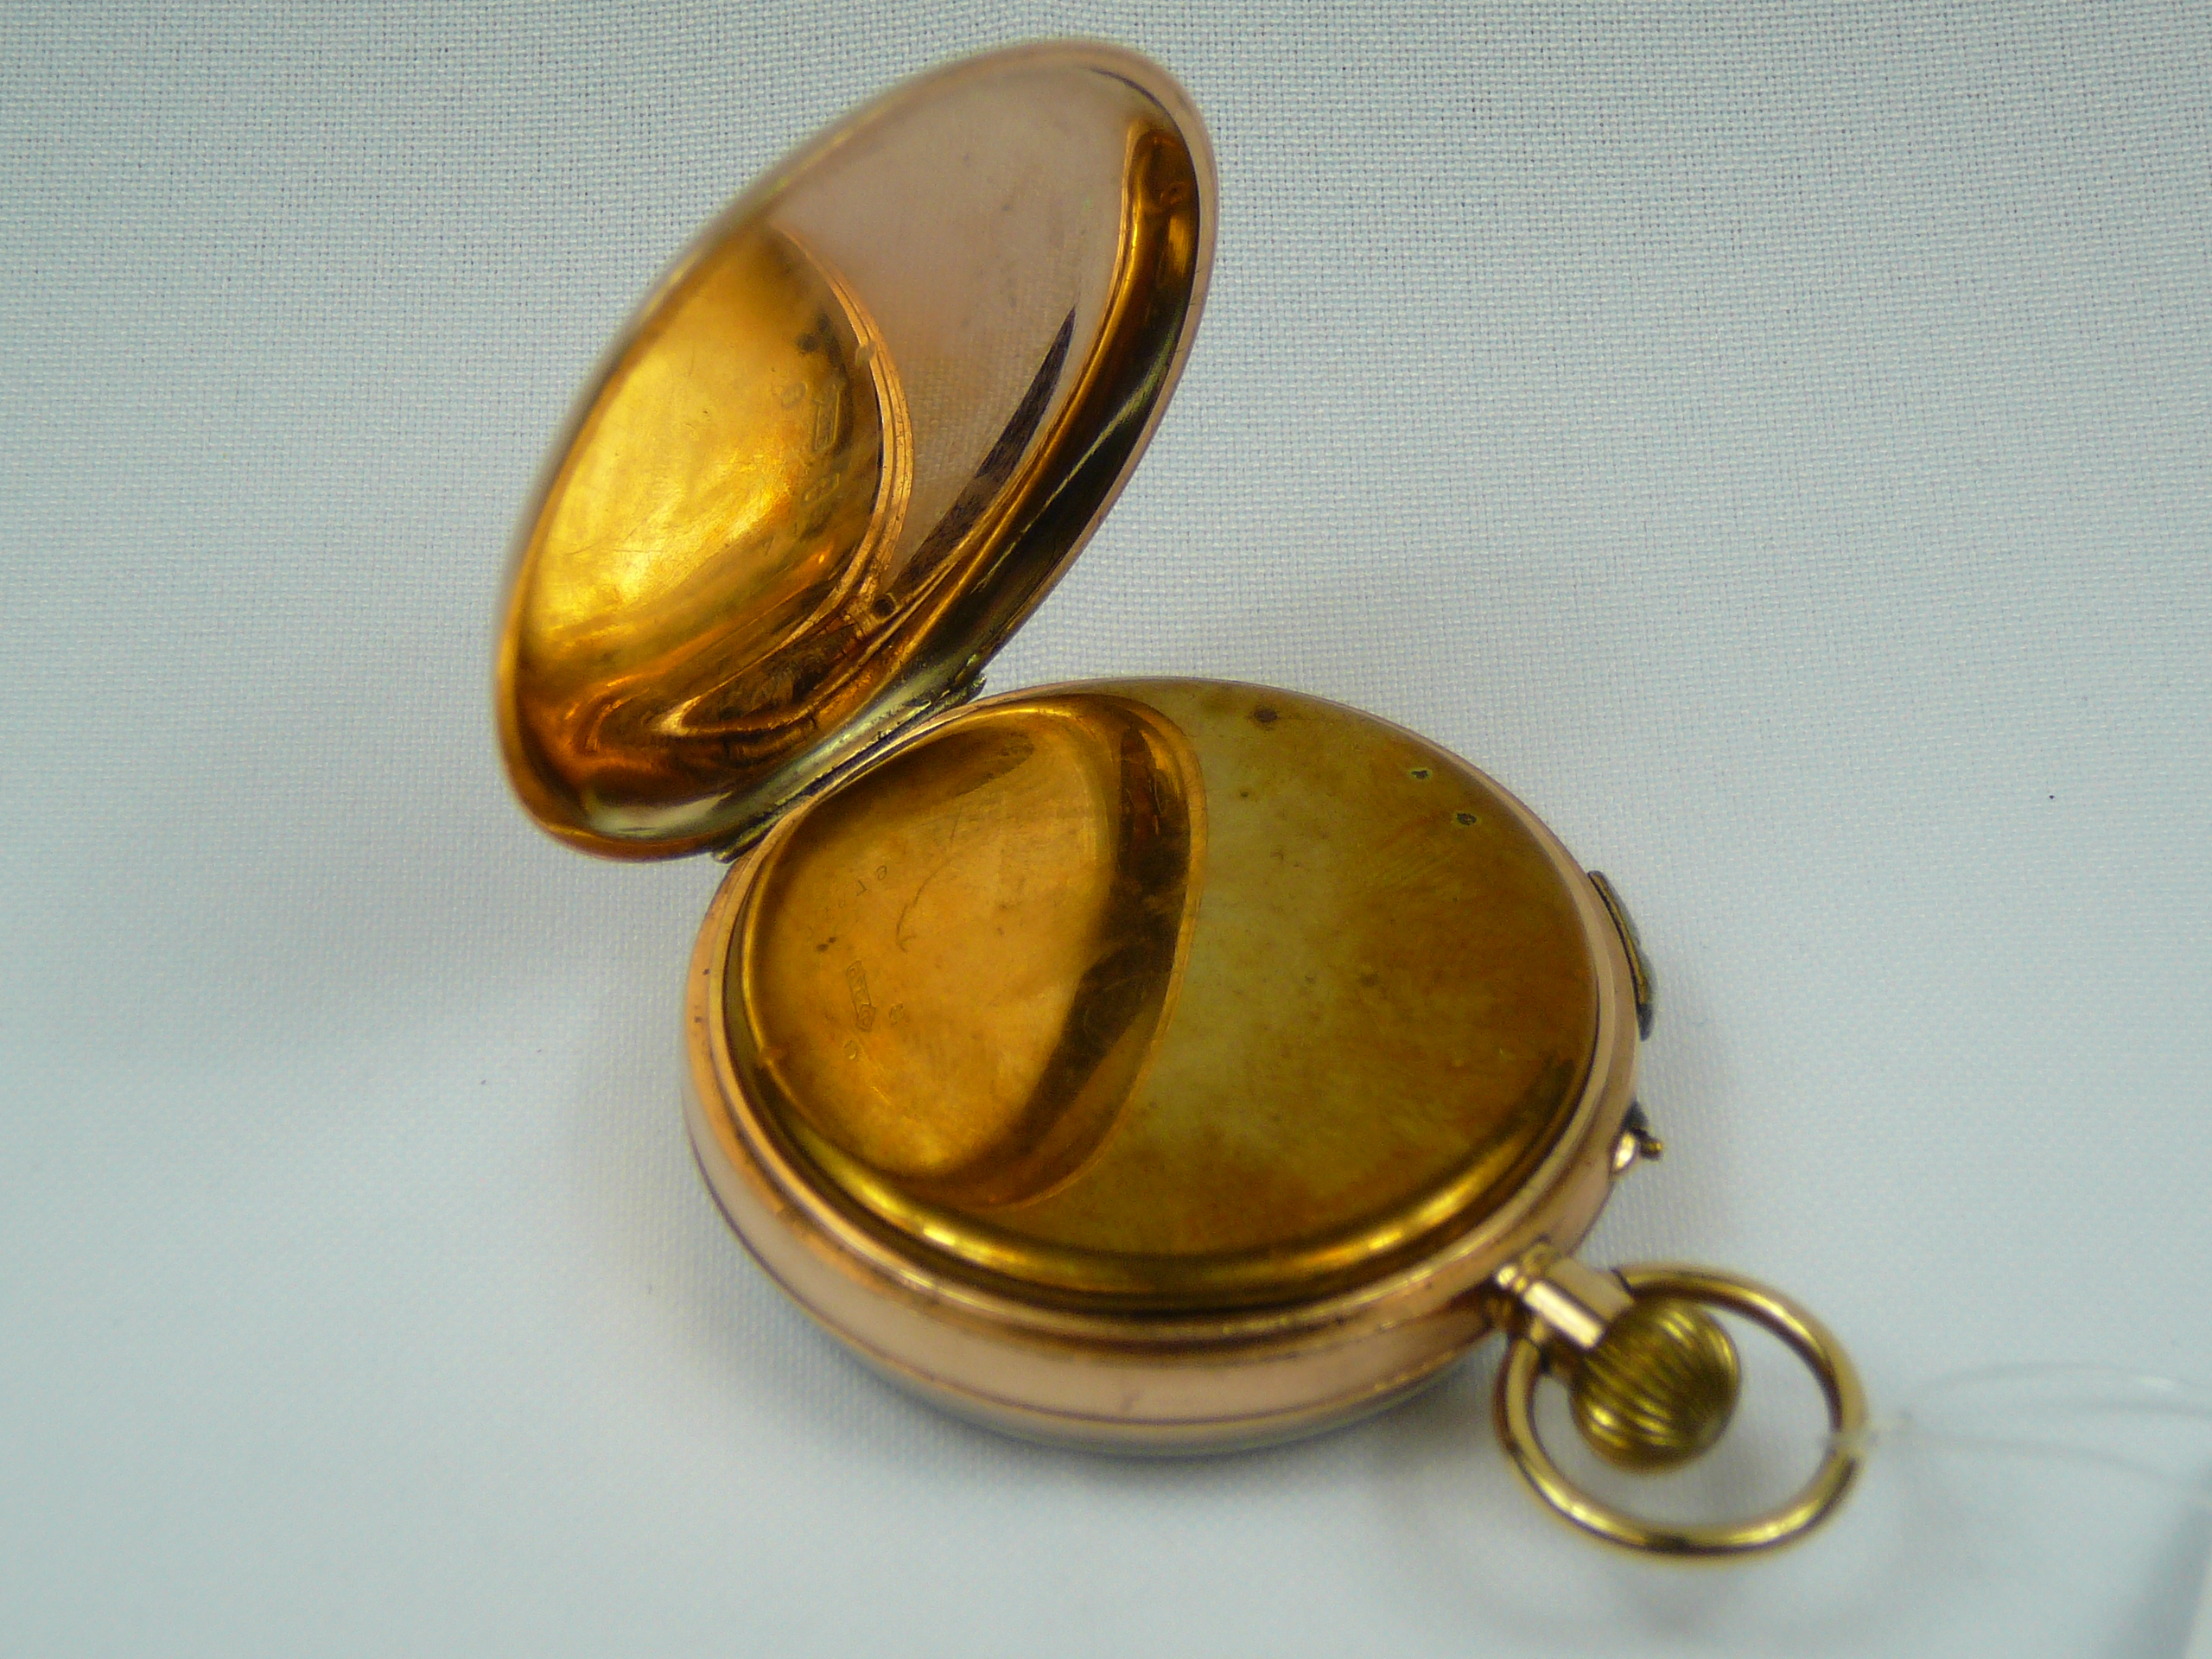 Gents gold pocket watch - Image 3 of 5